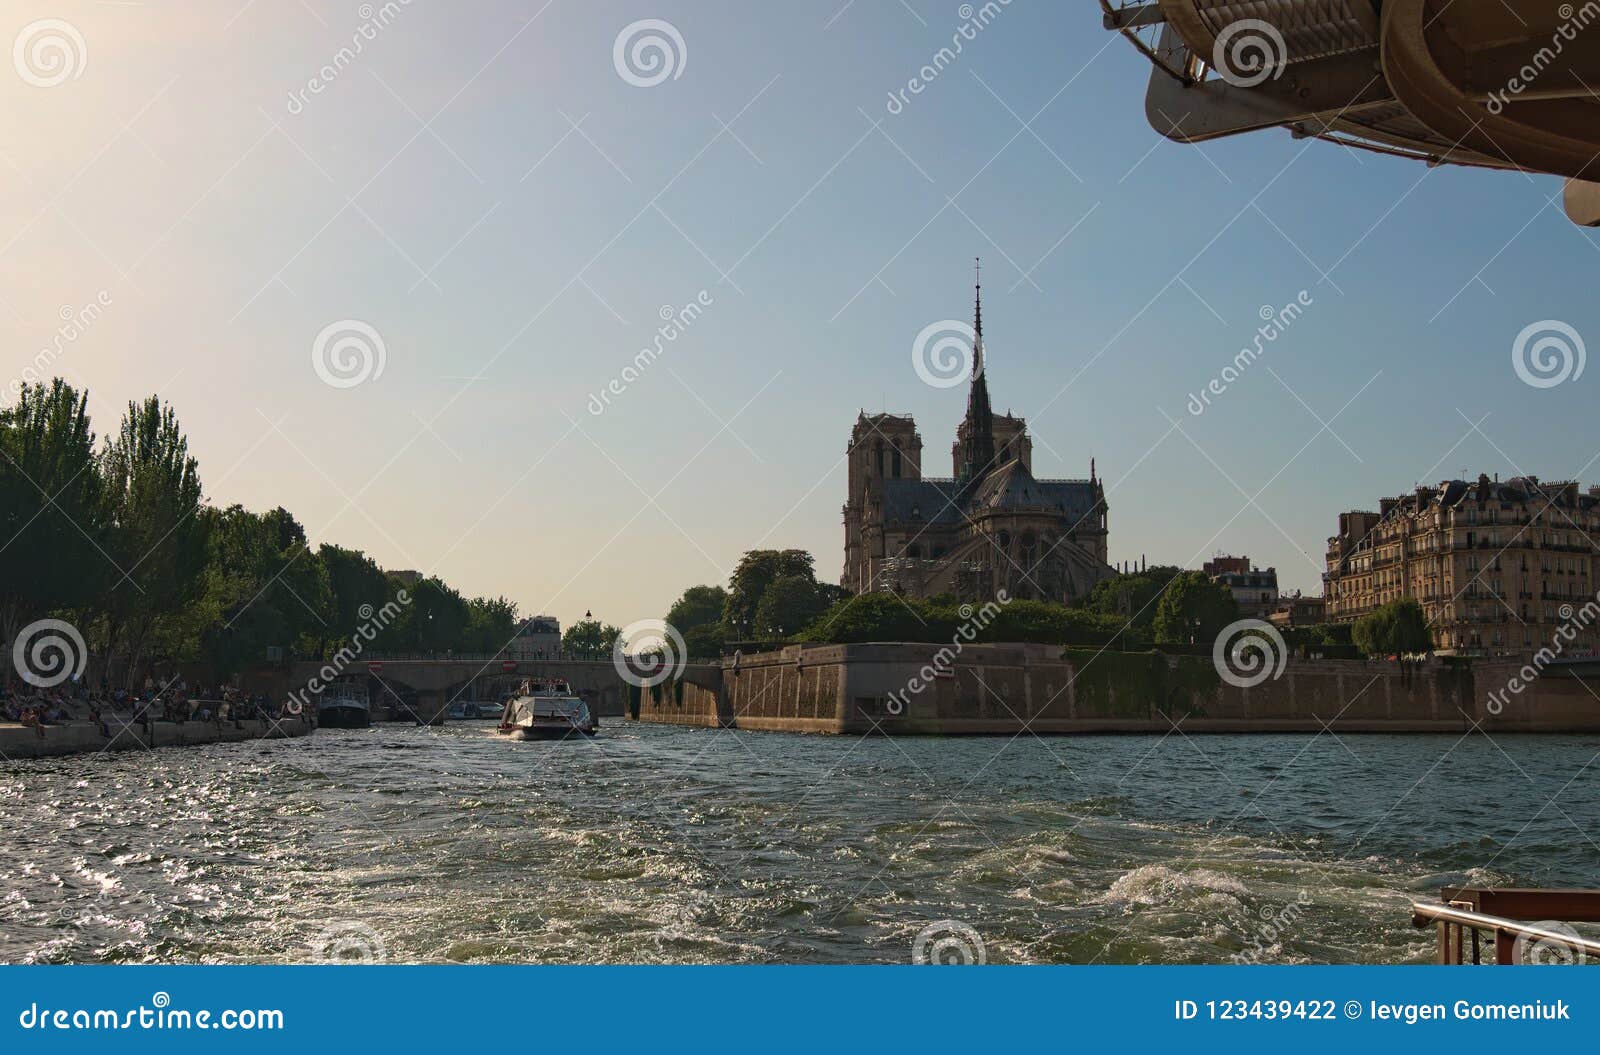 beautiful view of sqare jean xxiii and notre dame cathedral or notre-dame de paris-catholic church in the cite island, paris